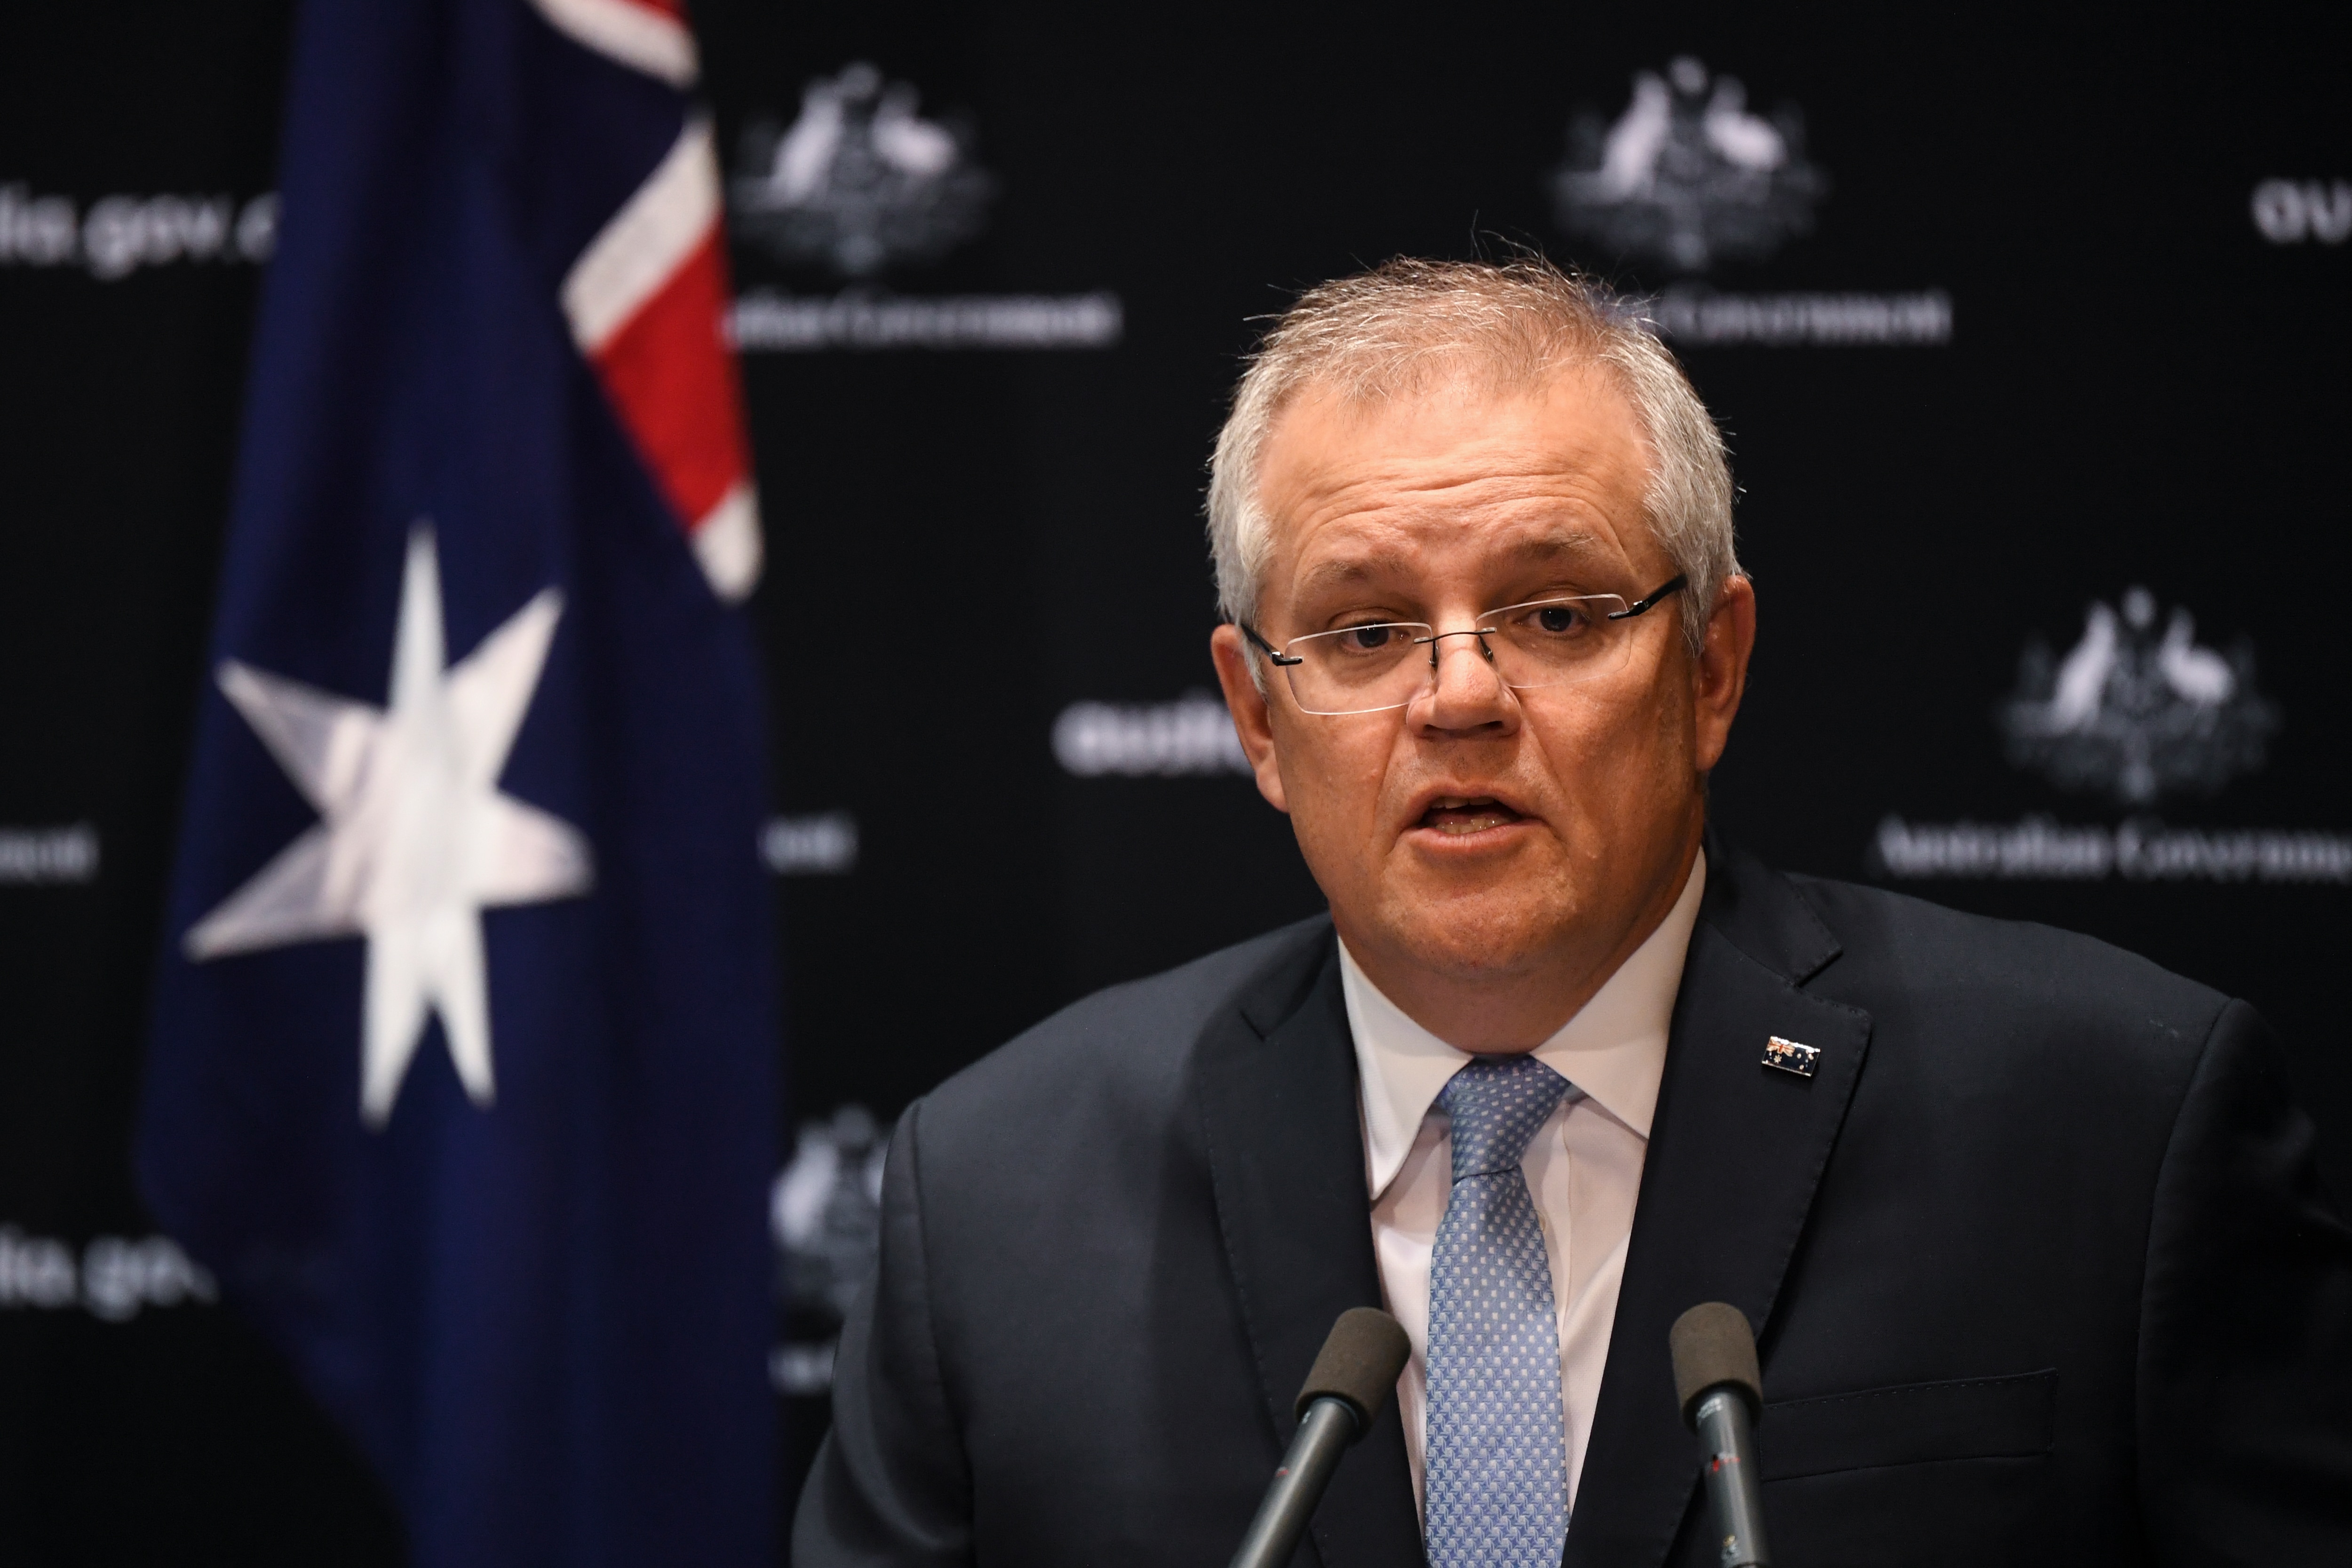 Australian Prime Minister Scott Morrison speaks to the media during a press conference at Parliament House in Canberra, Friday, June 12, 2020. (AAP Image/Lukas Coch) NO ARCHIVING